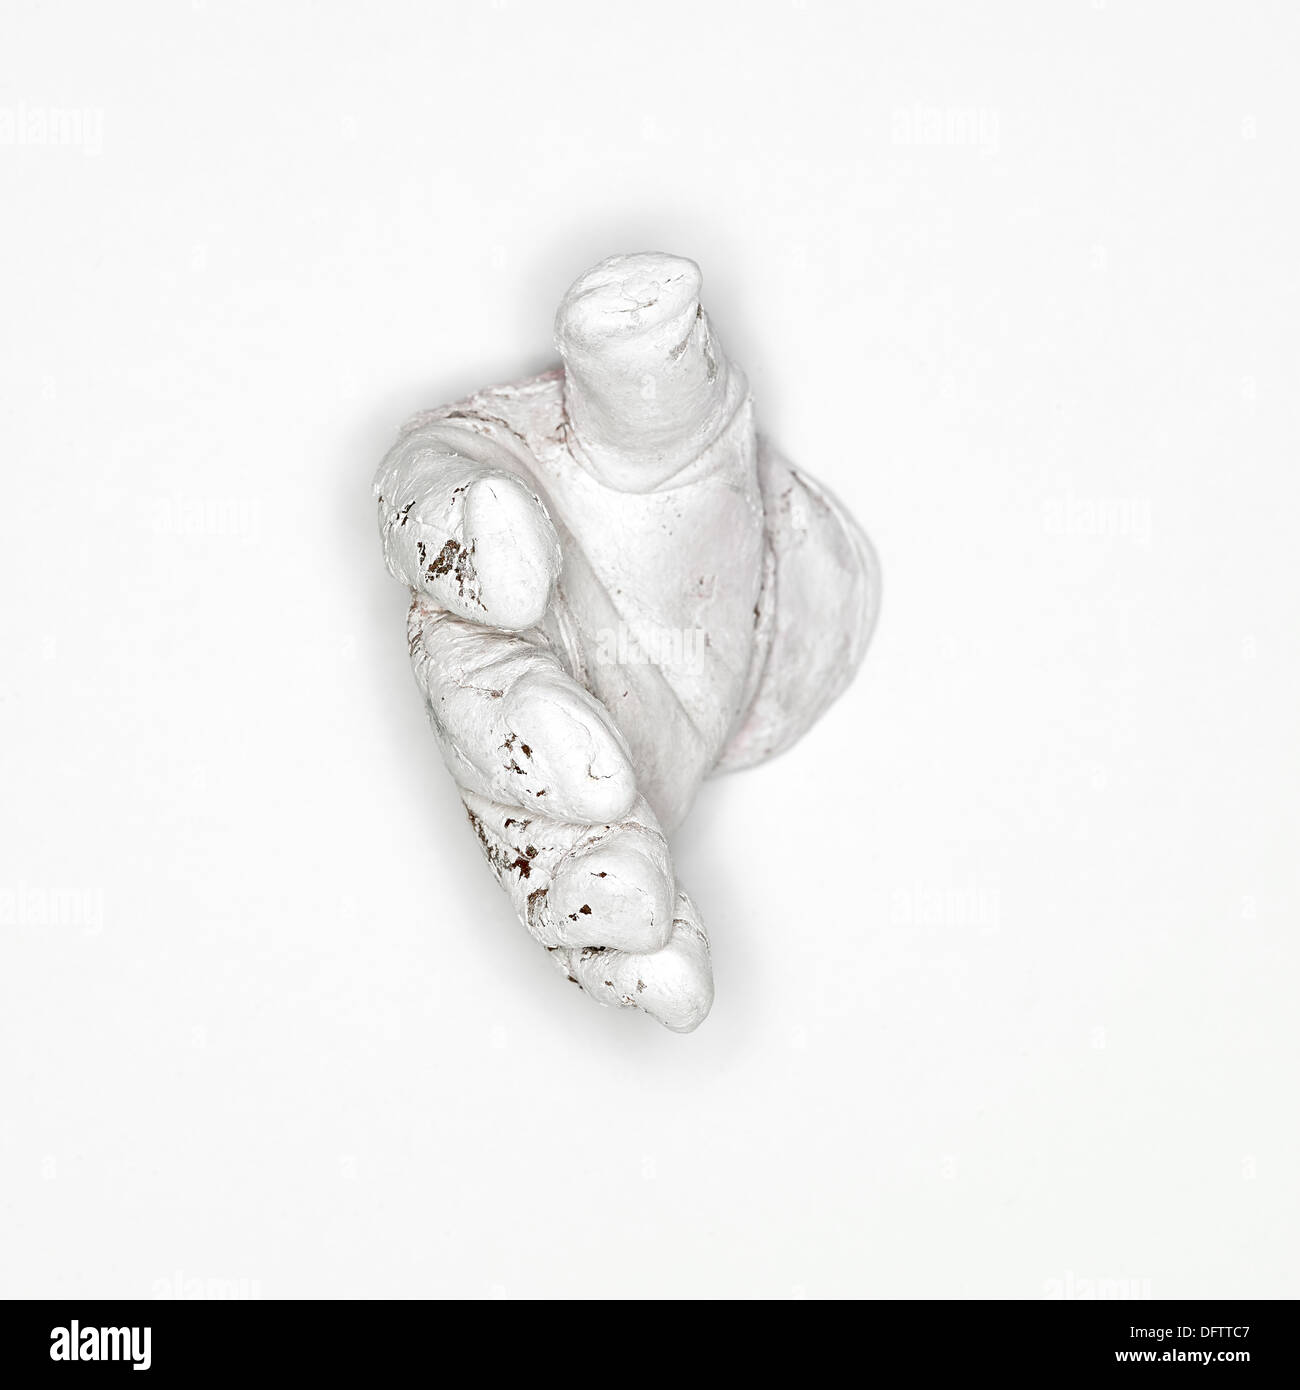 white paint covered glove on a white background reaching out Stock Photo